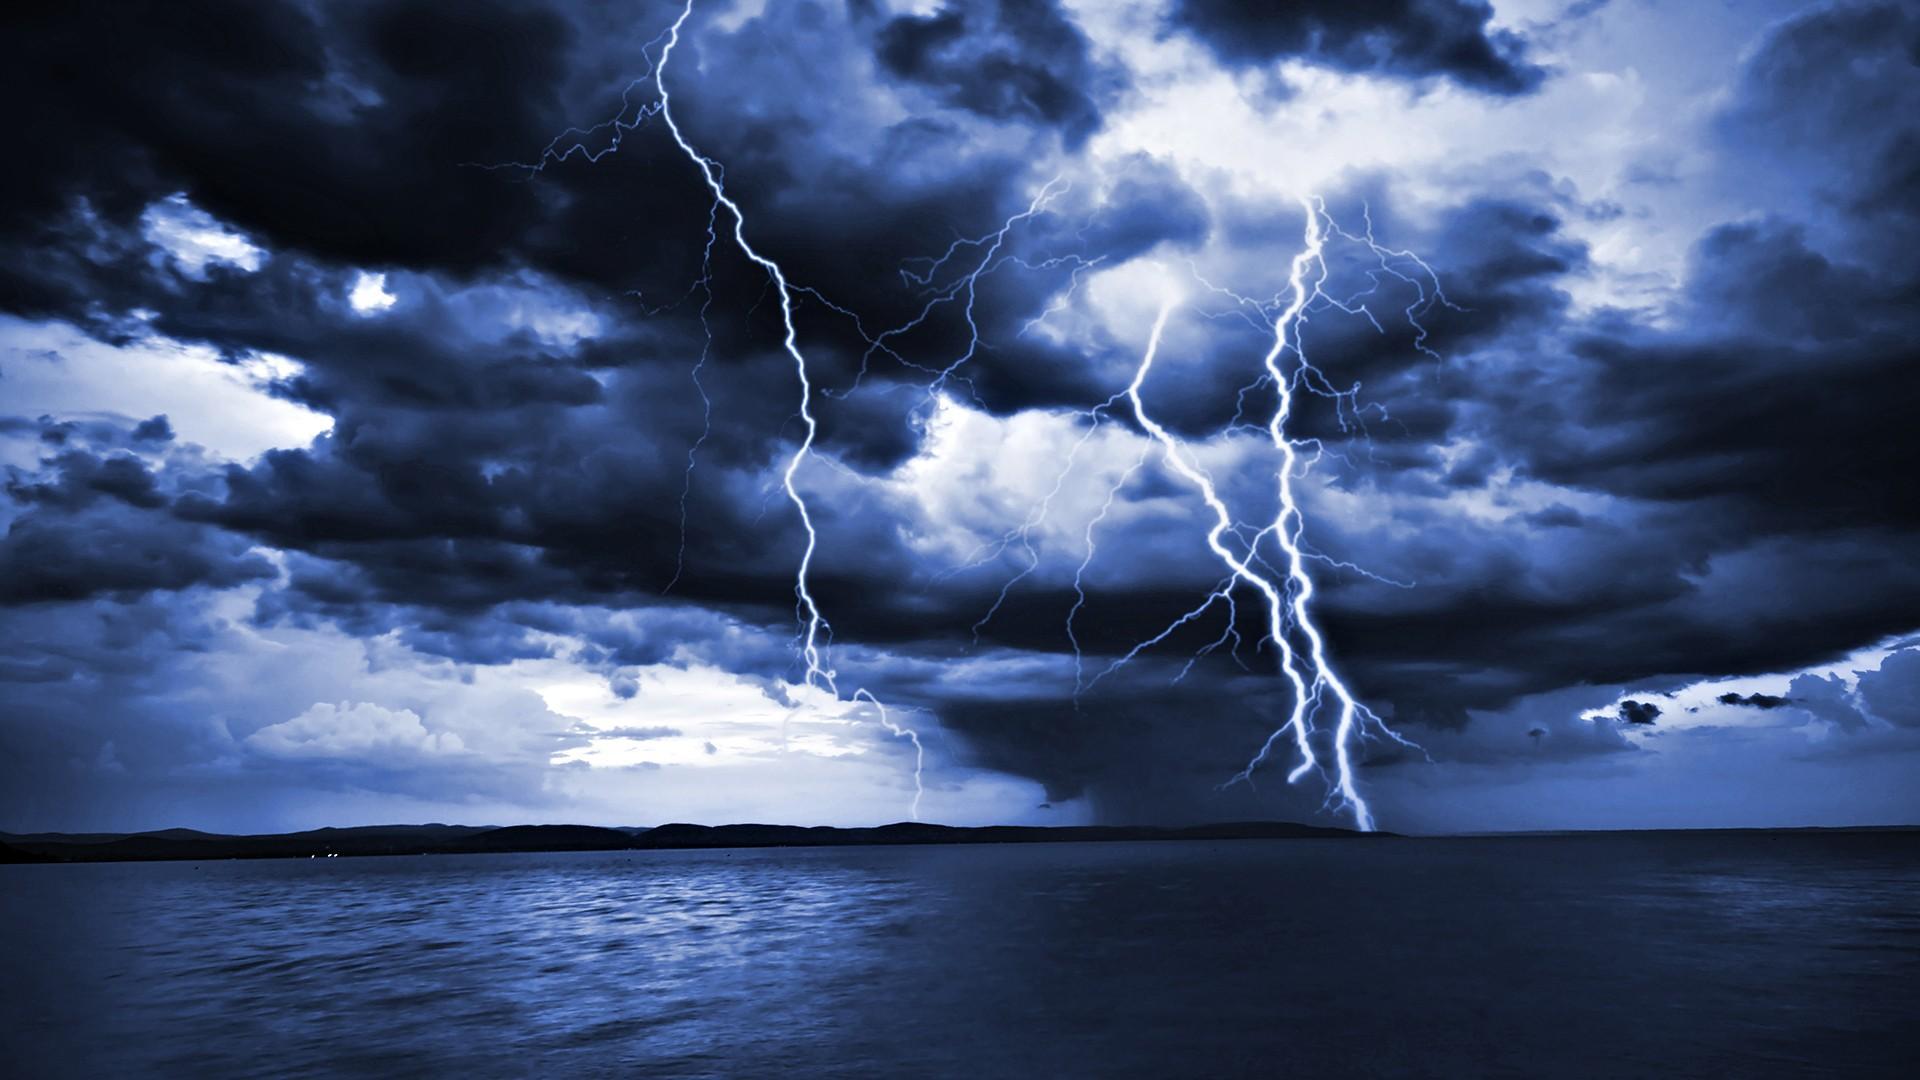 Sea Storm Live Wallpaper For Android Apk